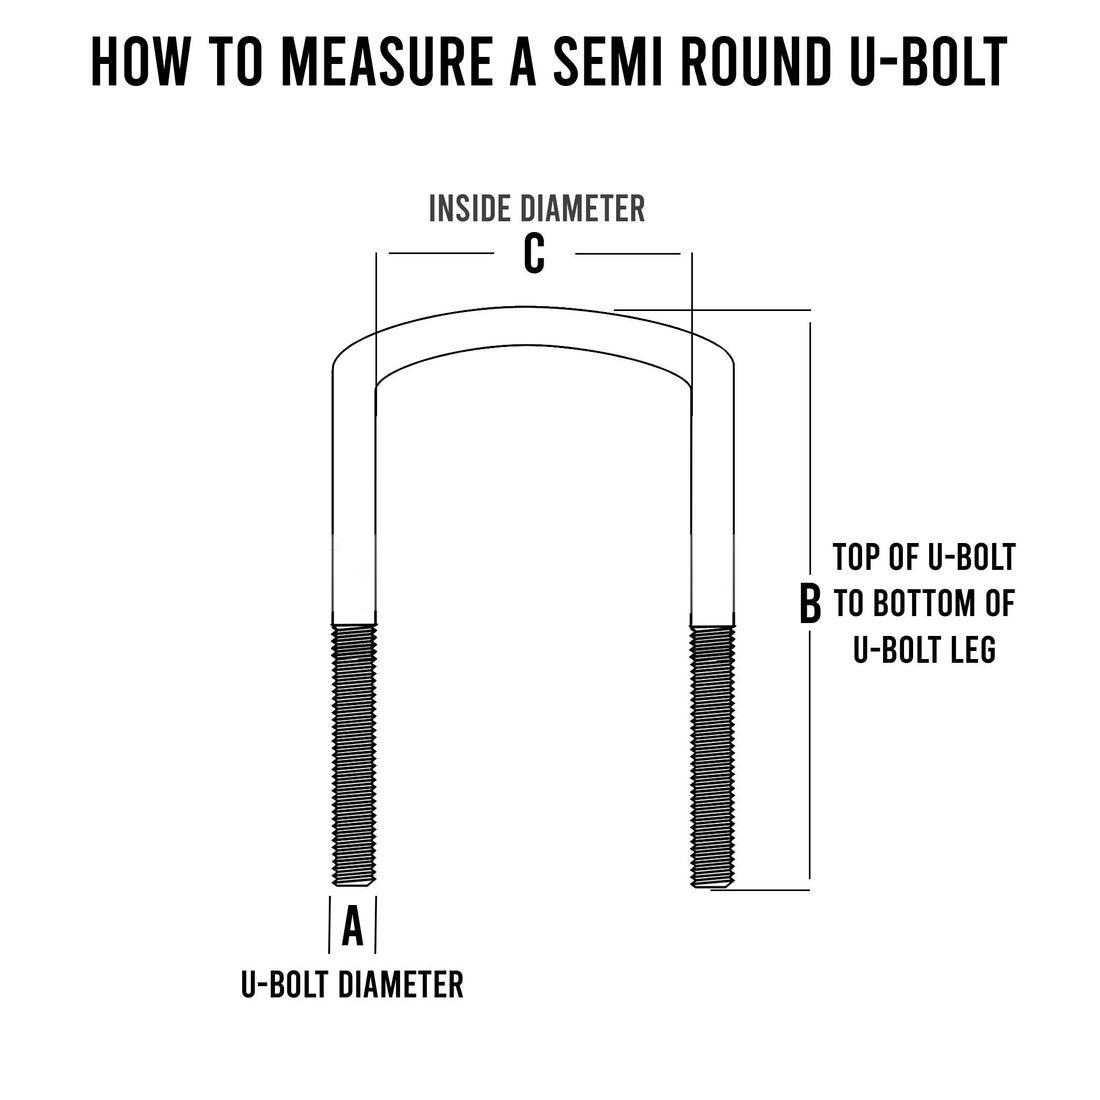 Diagram of how to measure a 1/2 inch semi round u-bolt.